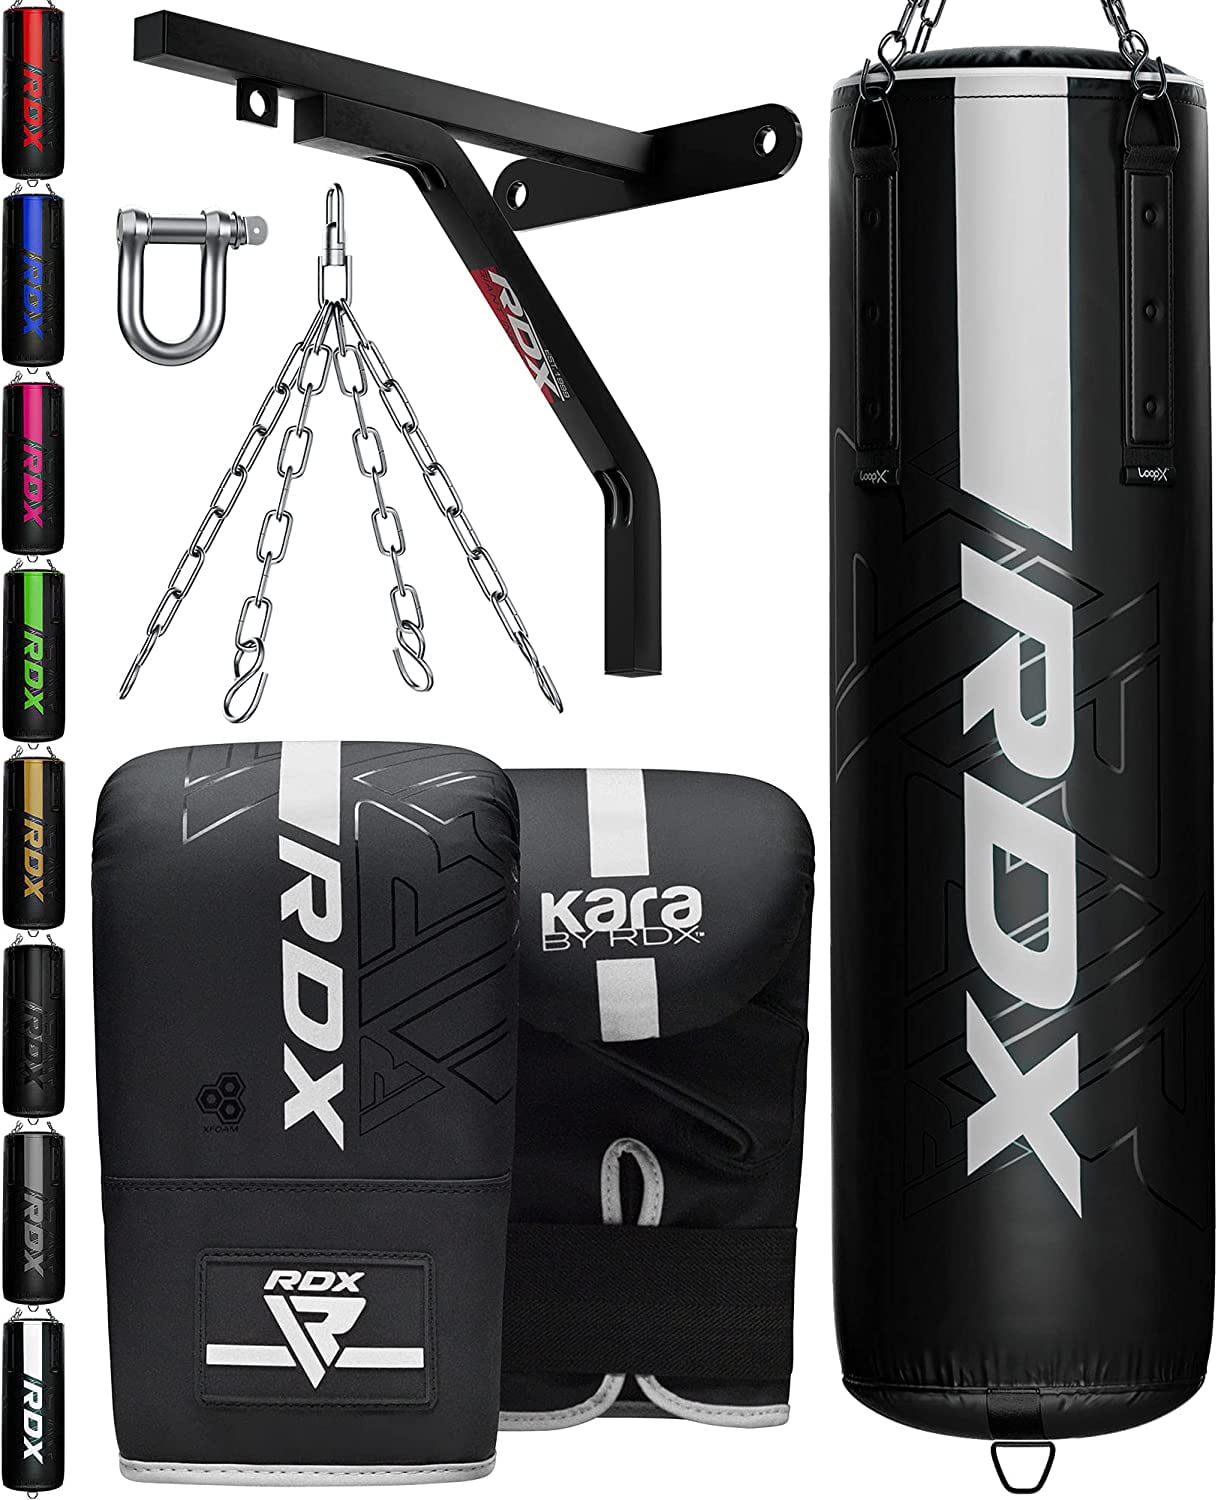 RDX Punch Bag Set Boxing Gym MMA for sale in Co Down for 99 on DoneDeal